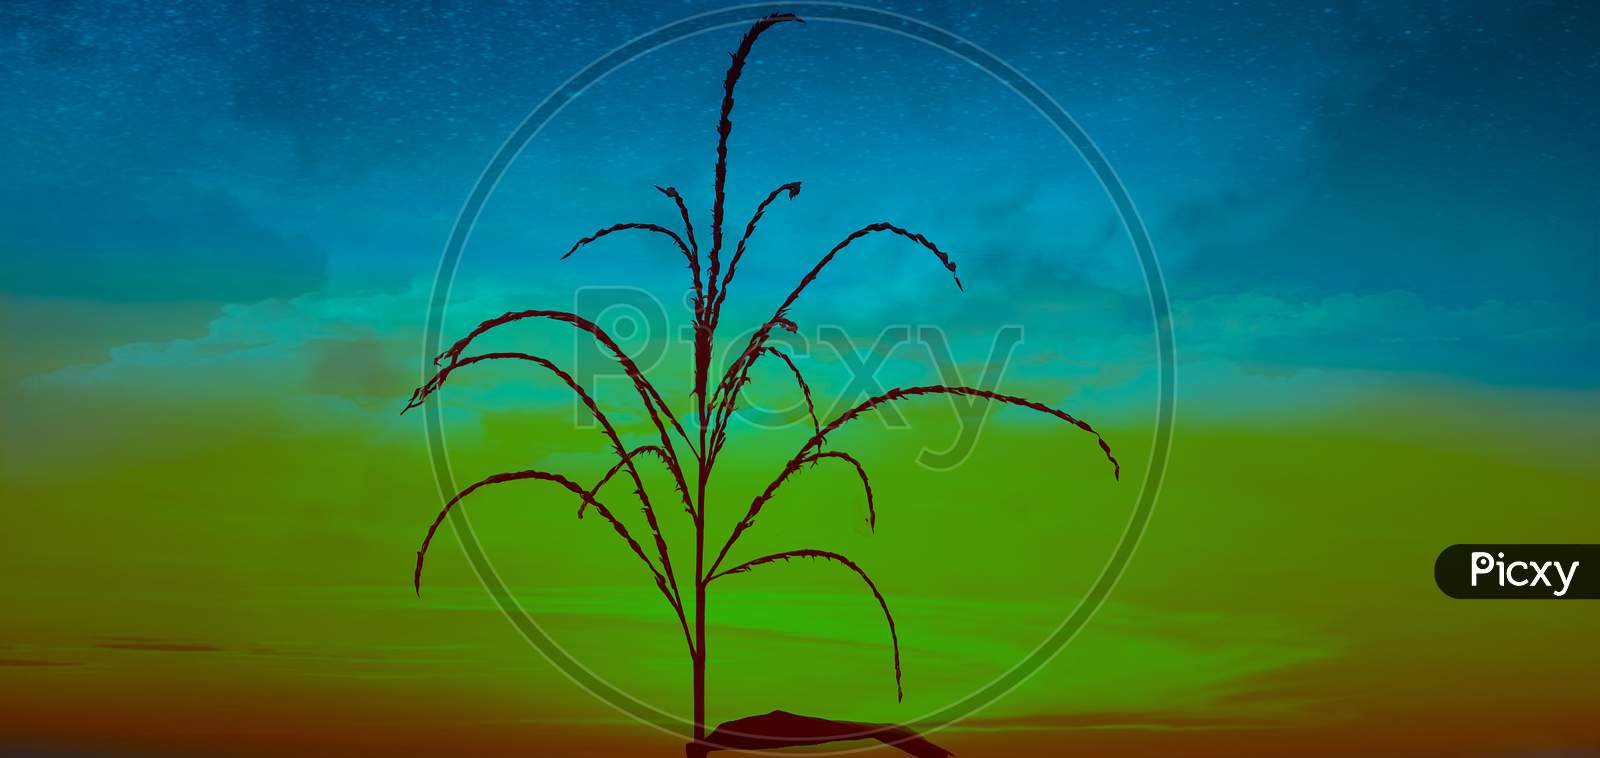 Dry millet with colourful sky, really amazing wallpaper